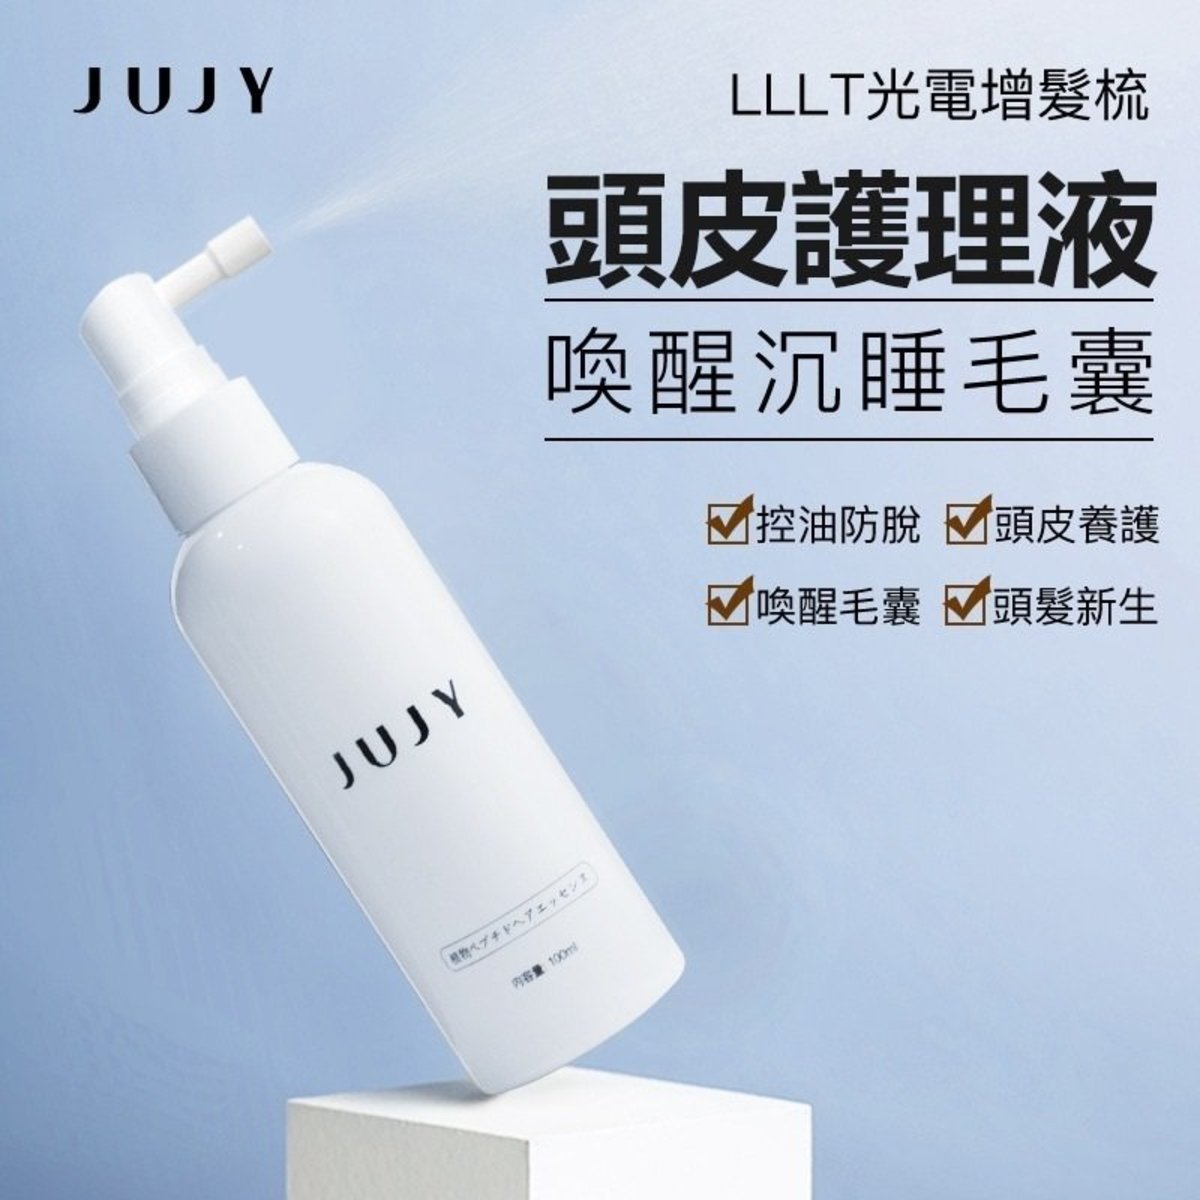 Jujy - LLLT photoelectric hair comb special scalp care solution